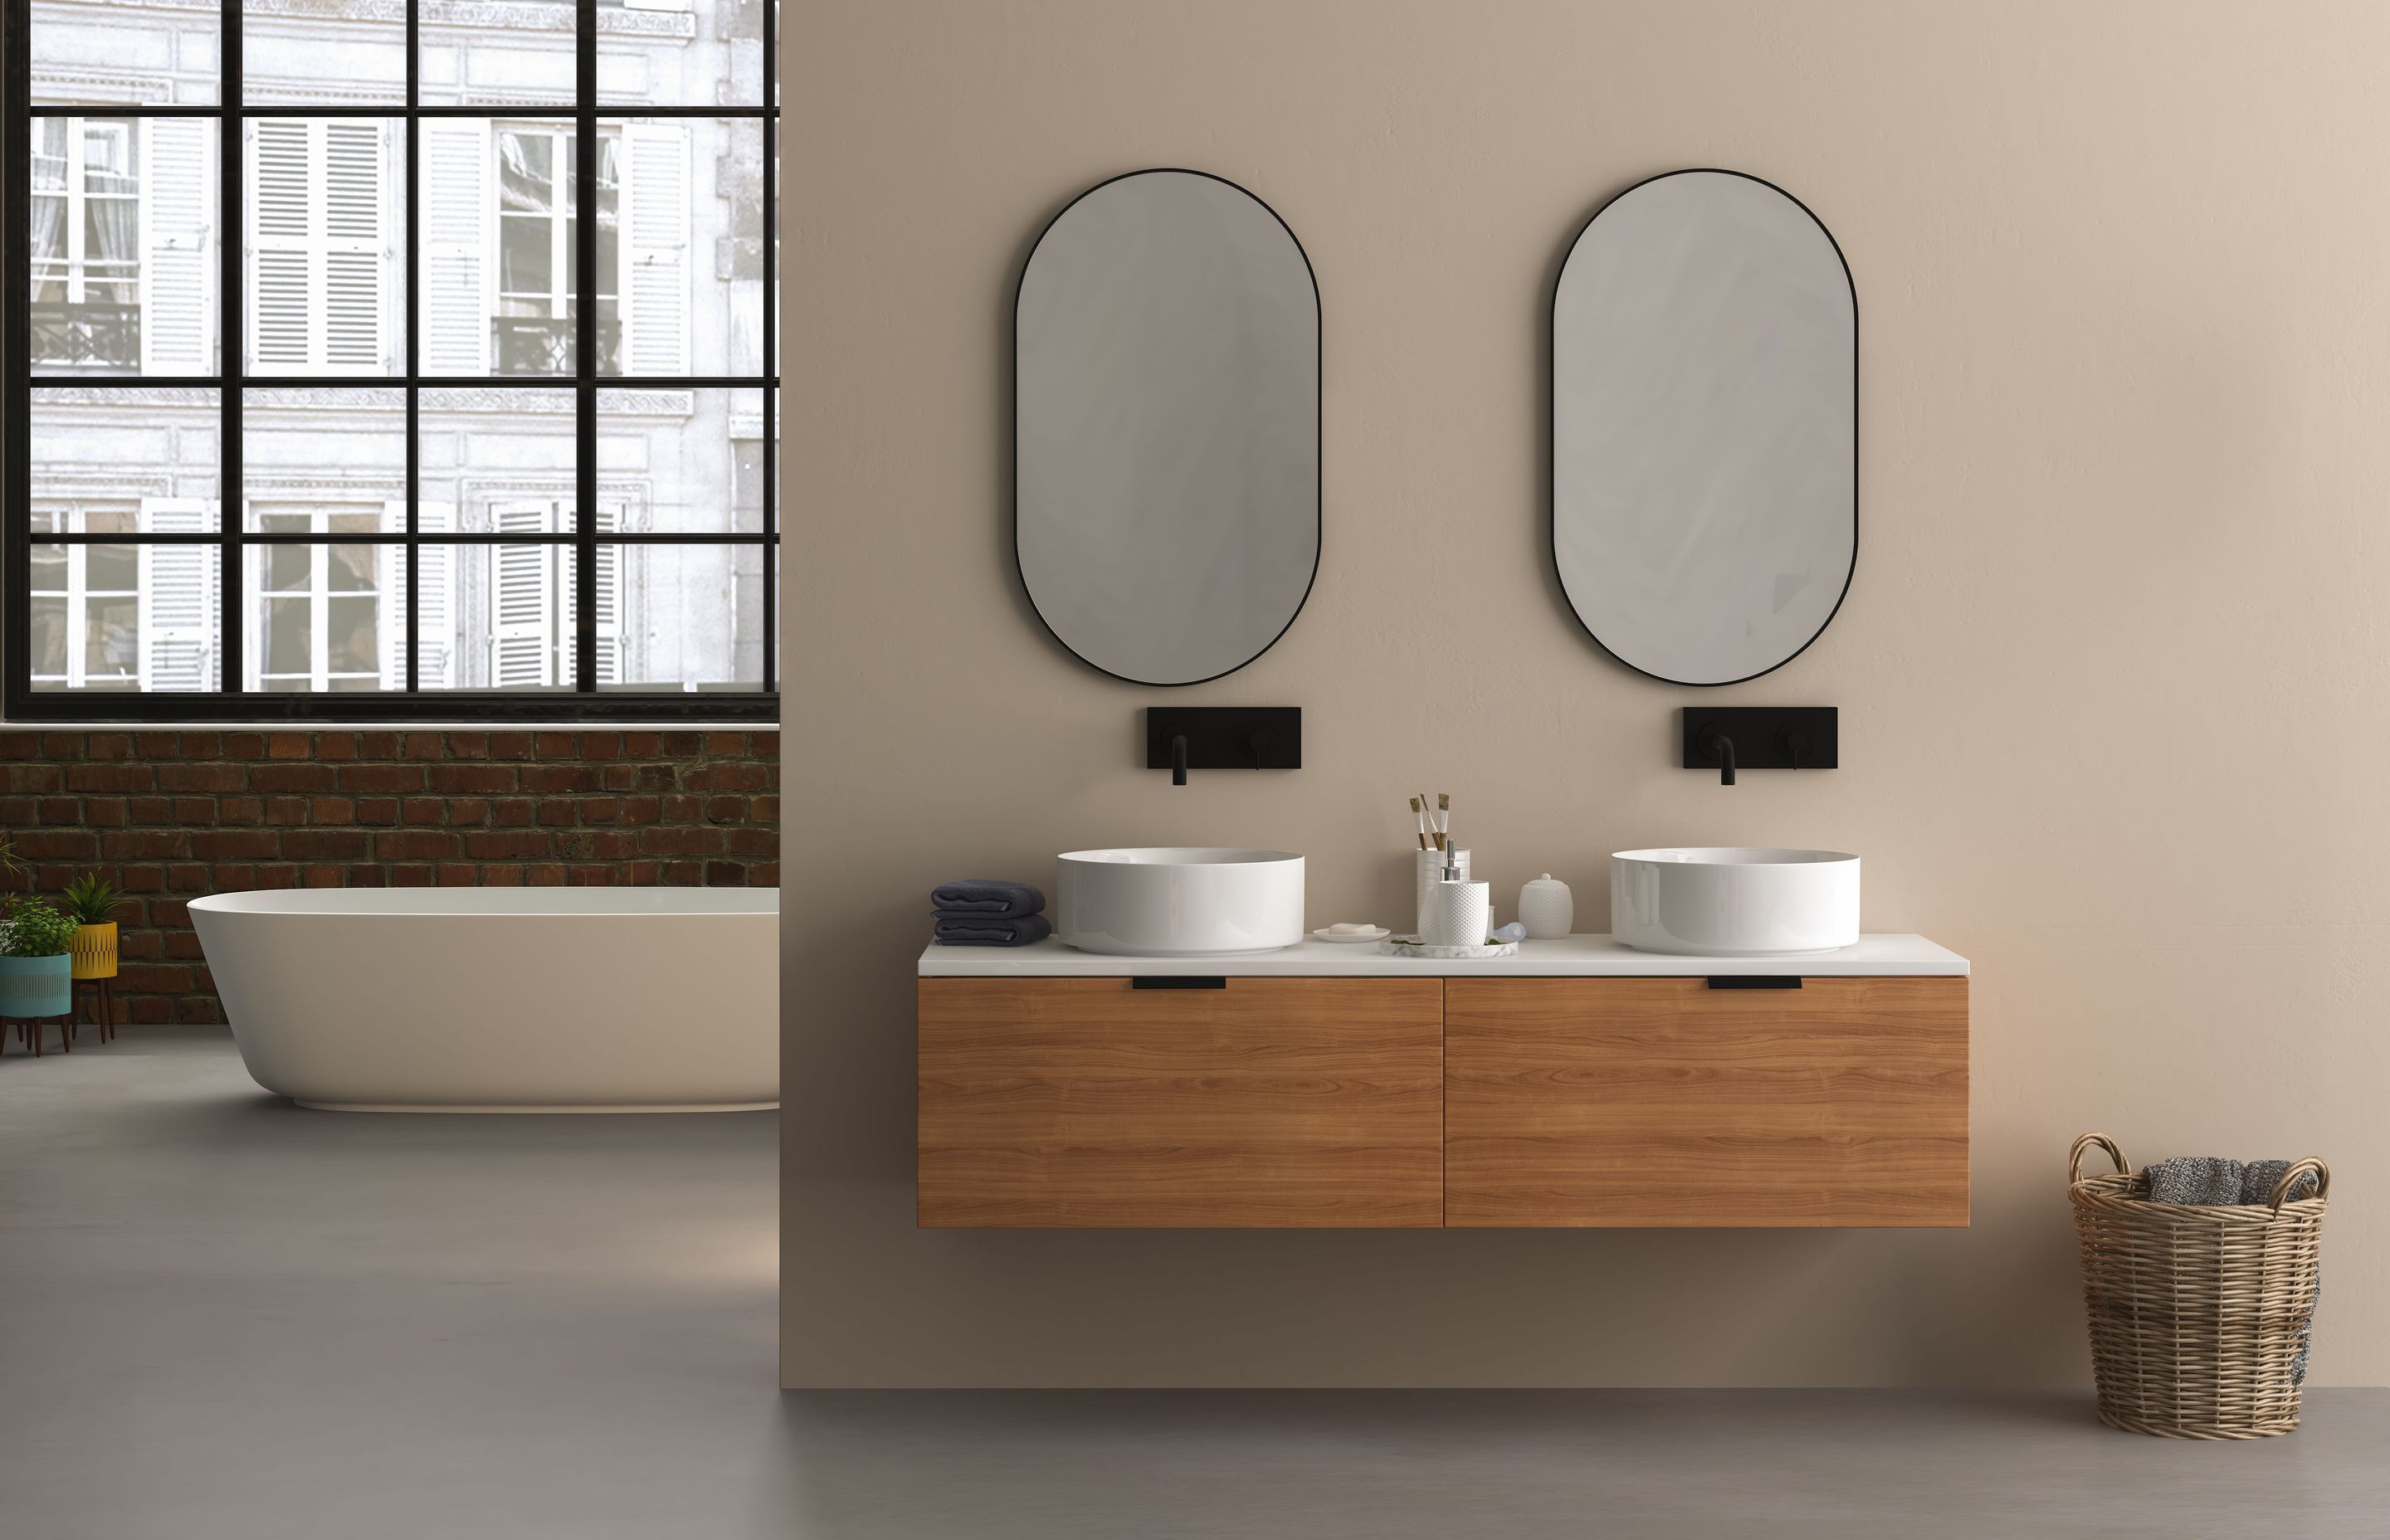 A floating vanity or floating cabinet is an effective use of cabinet space.